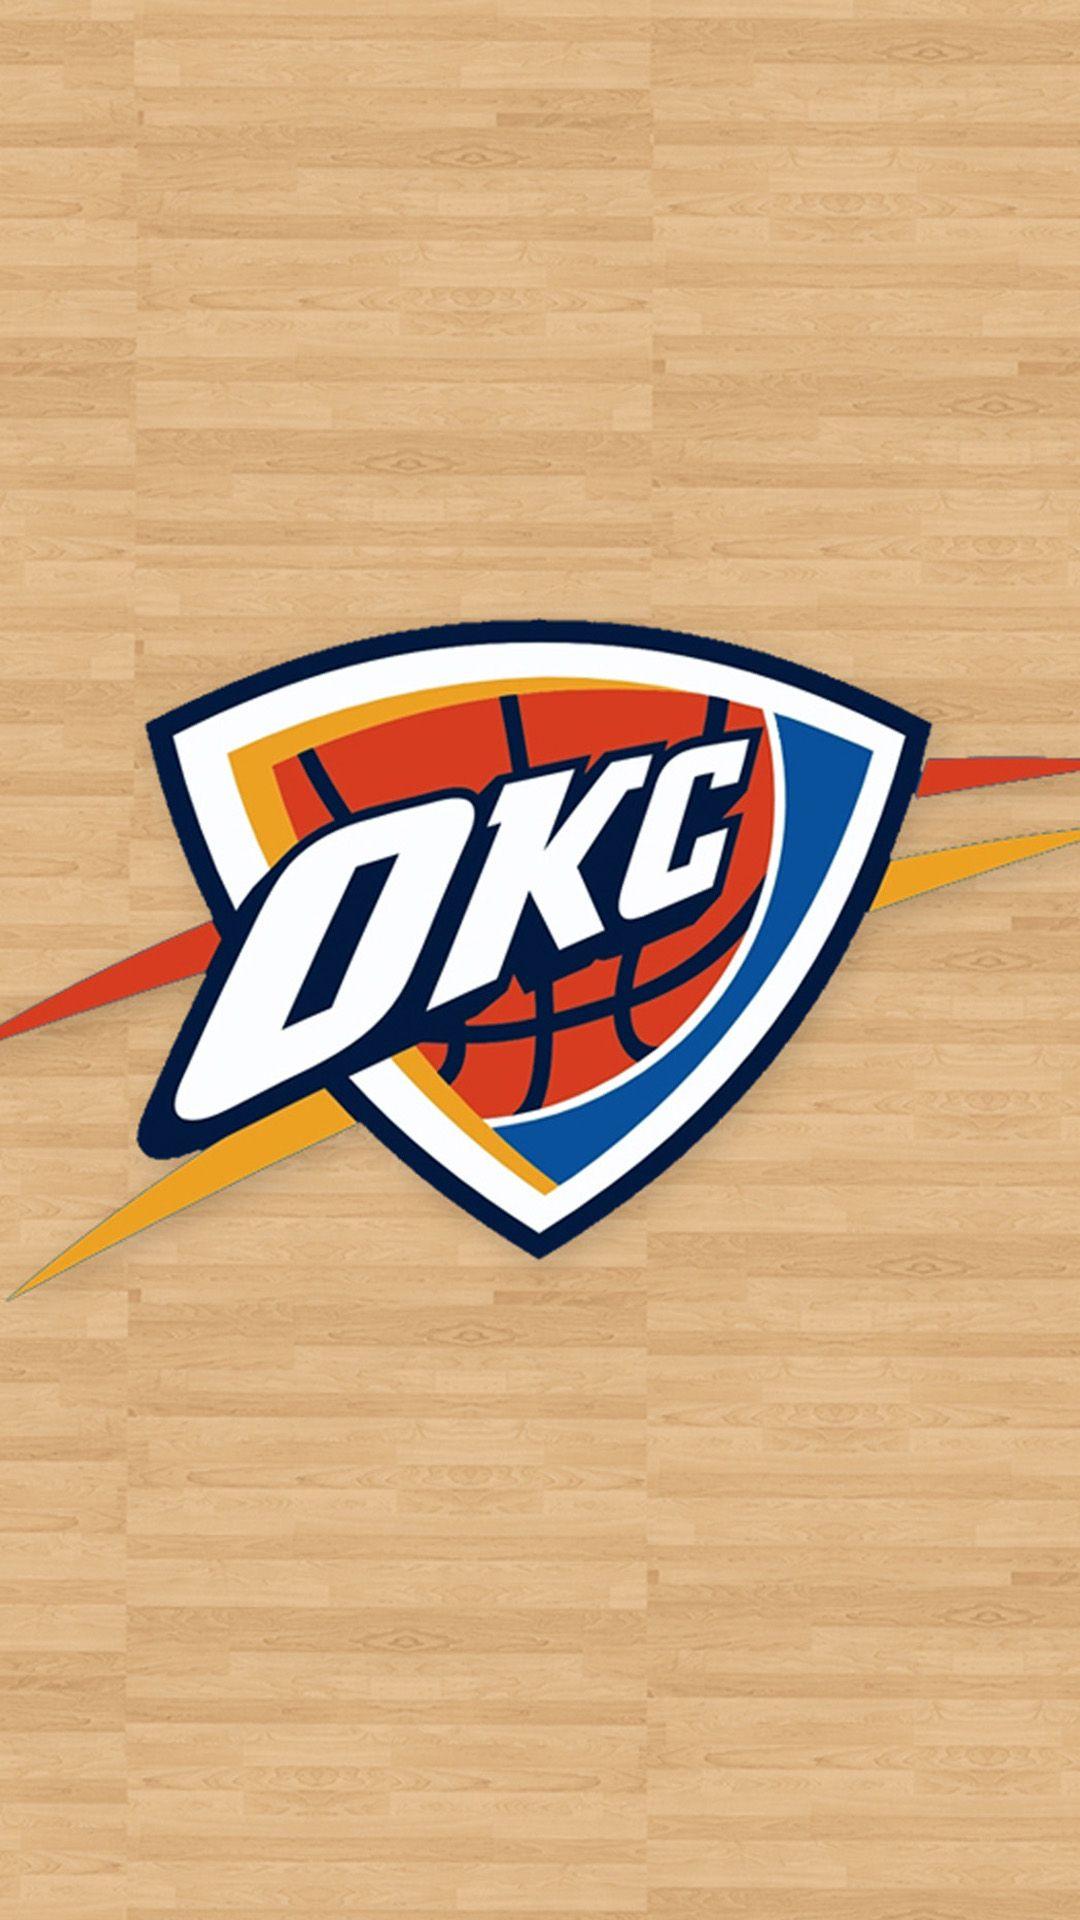 Oklahoma City Thunder Wallpapers for Iphone 7, Iphone 7 plus